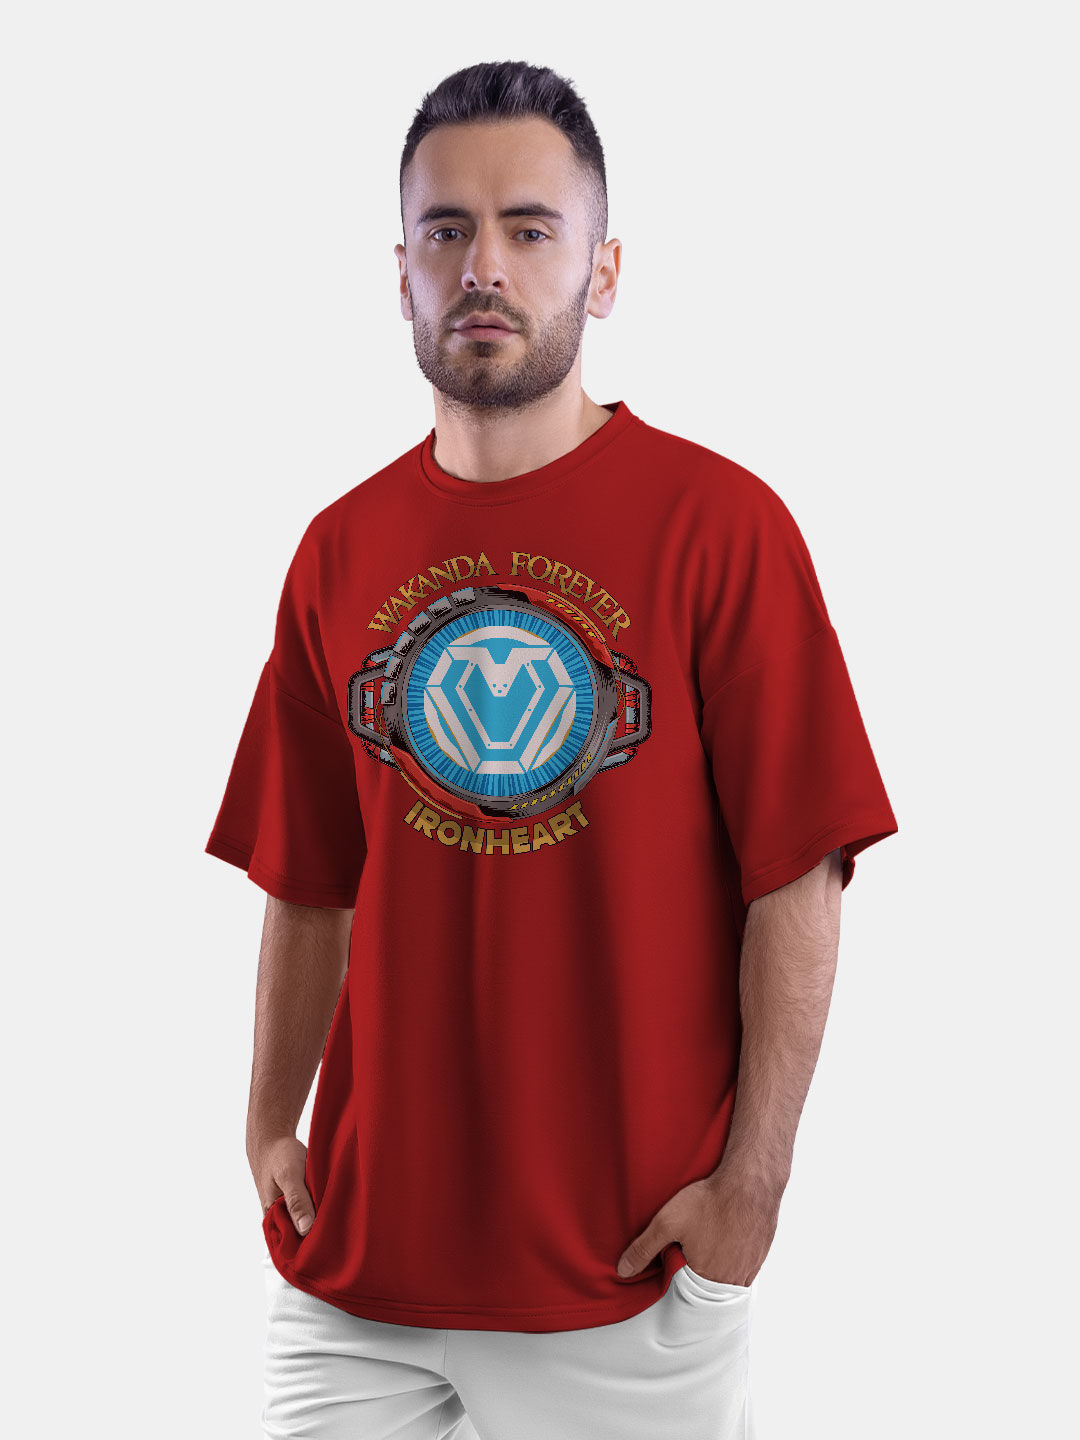 Buy Wakanda Forever Power Blood Red - Male Oversized T-Shirt T-Shirts Online